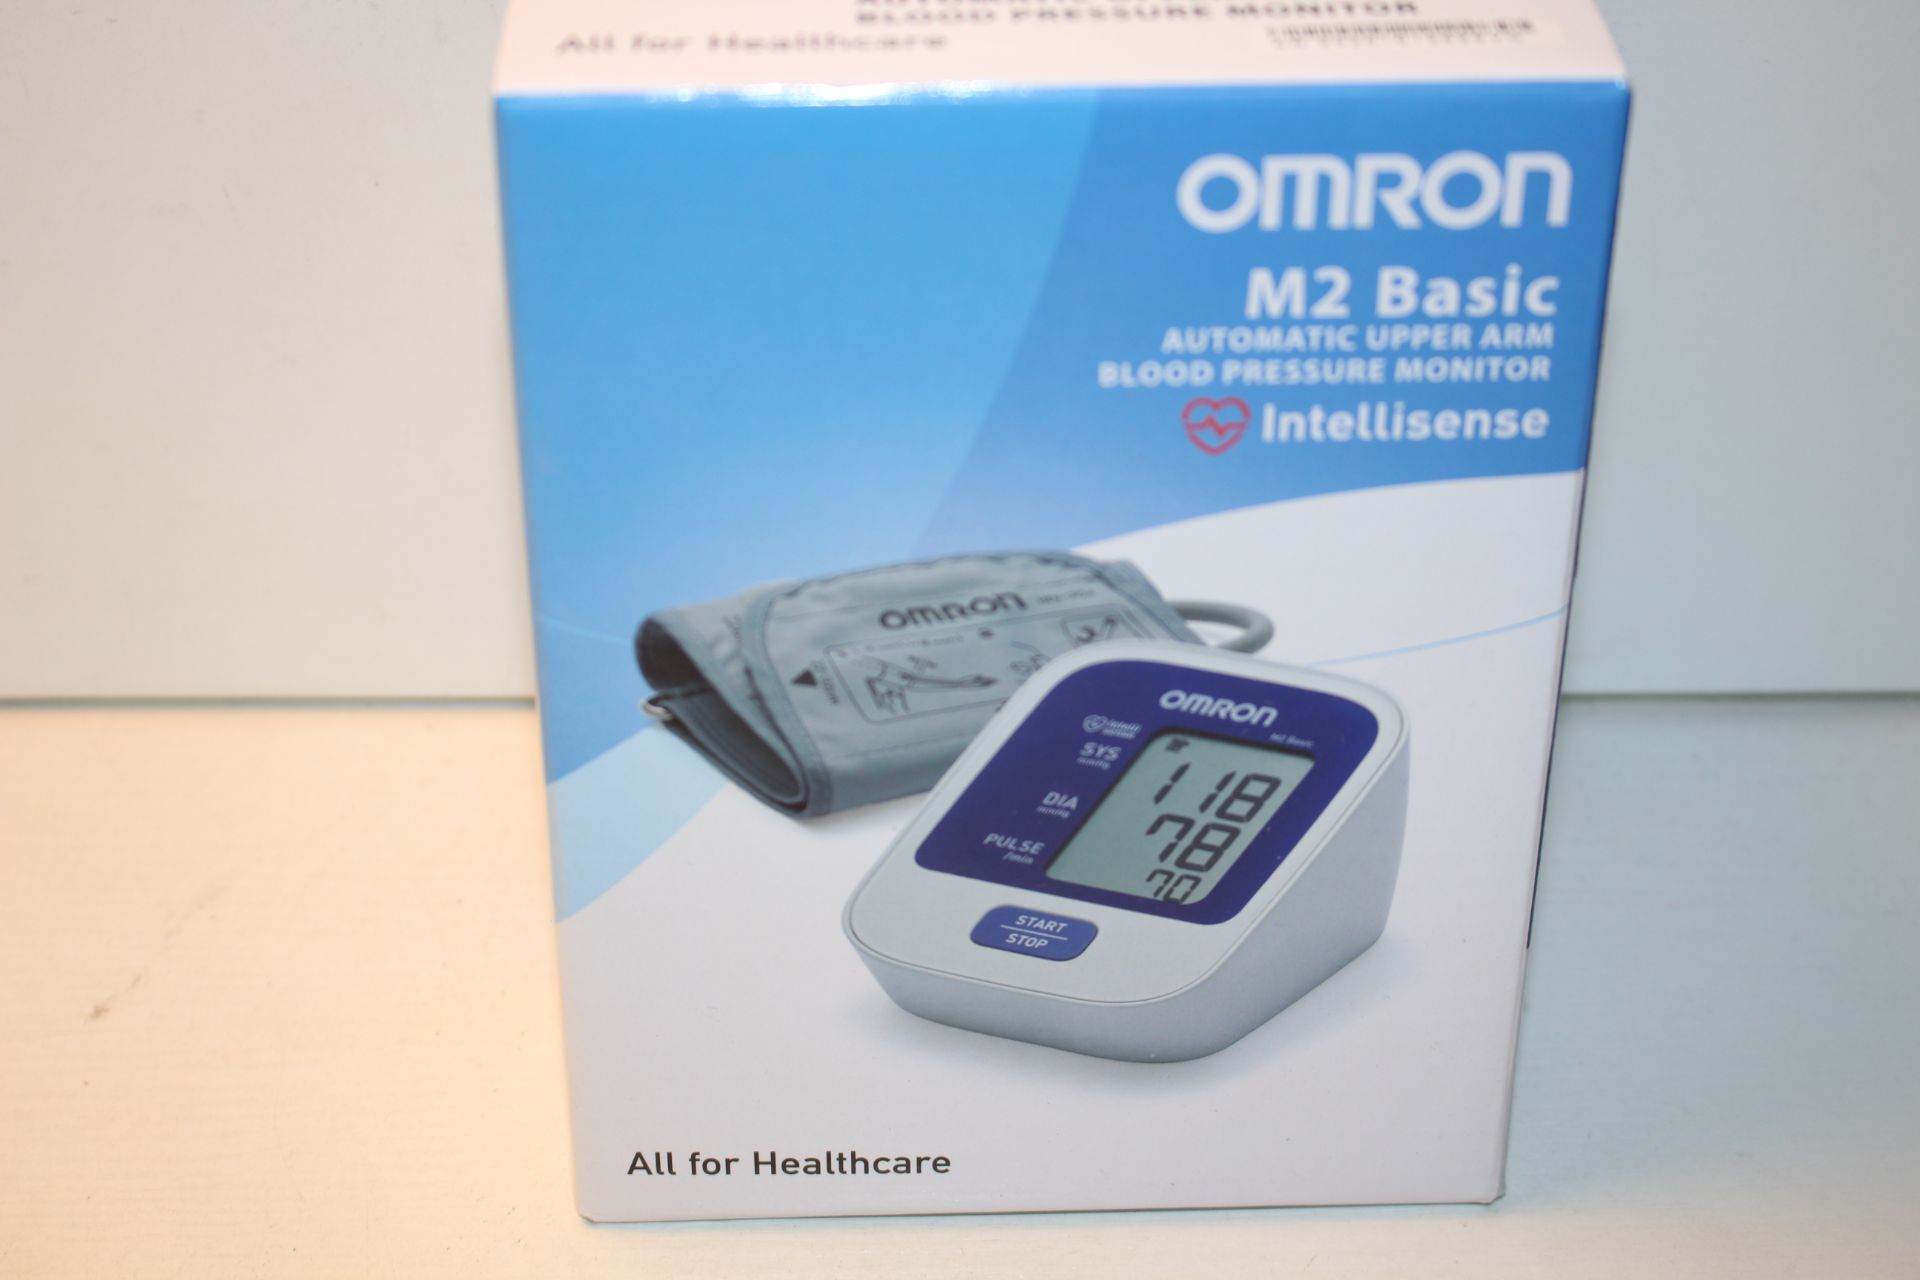 BOXED OMRON M2 BASIC INTELLISENSE AUTOMATIC UPPER ARM BLOOD PRESSURE MONITOR Condition